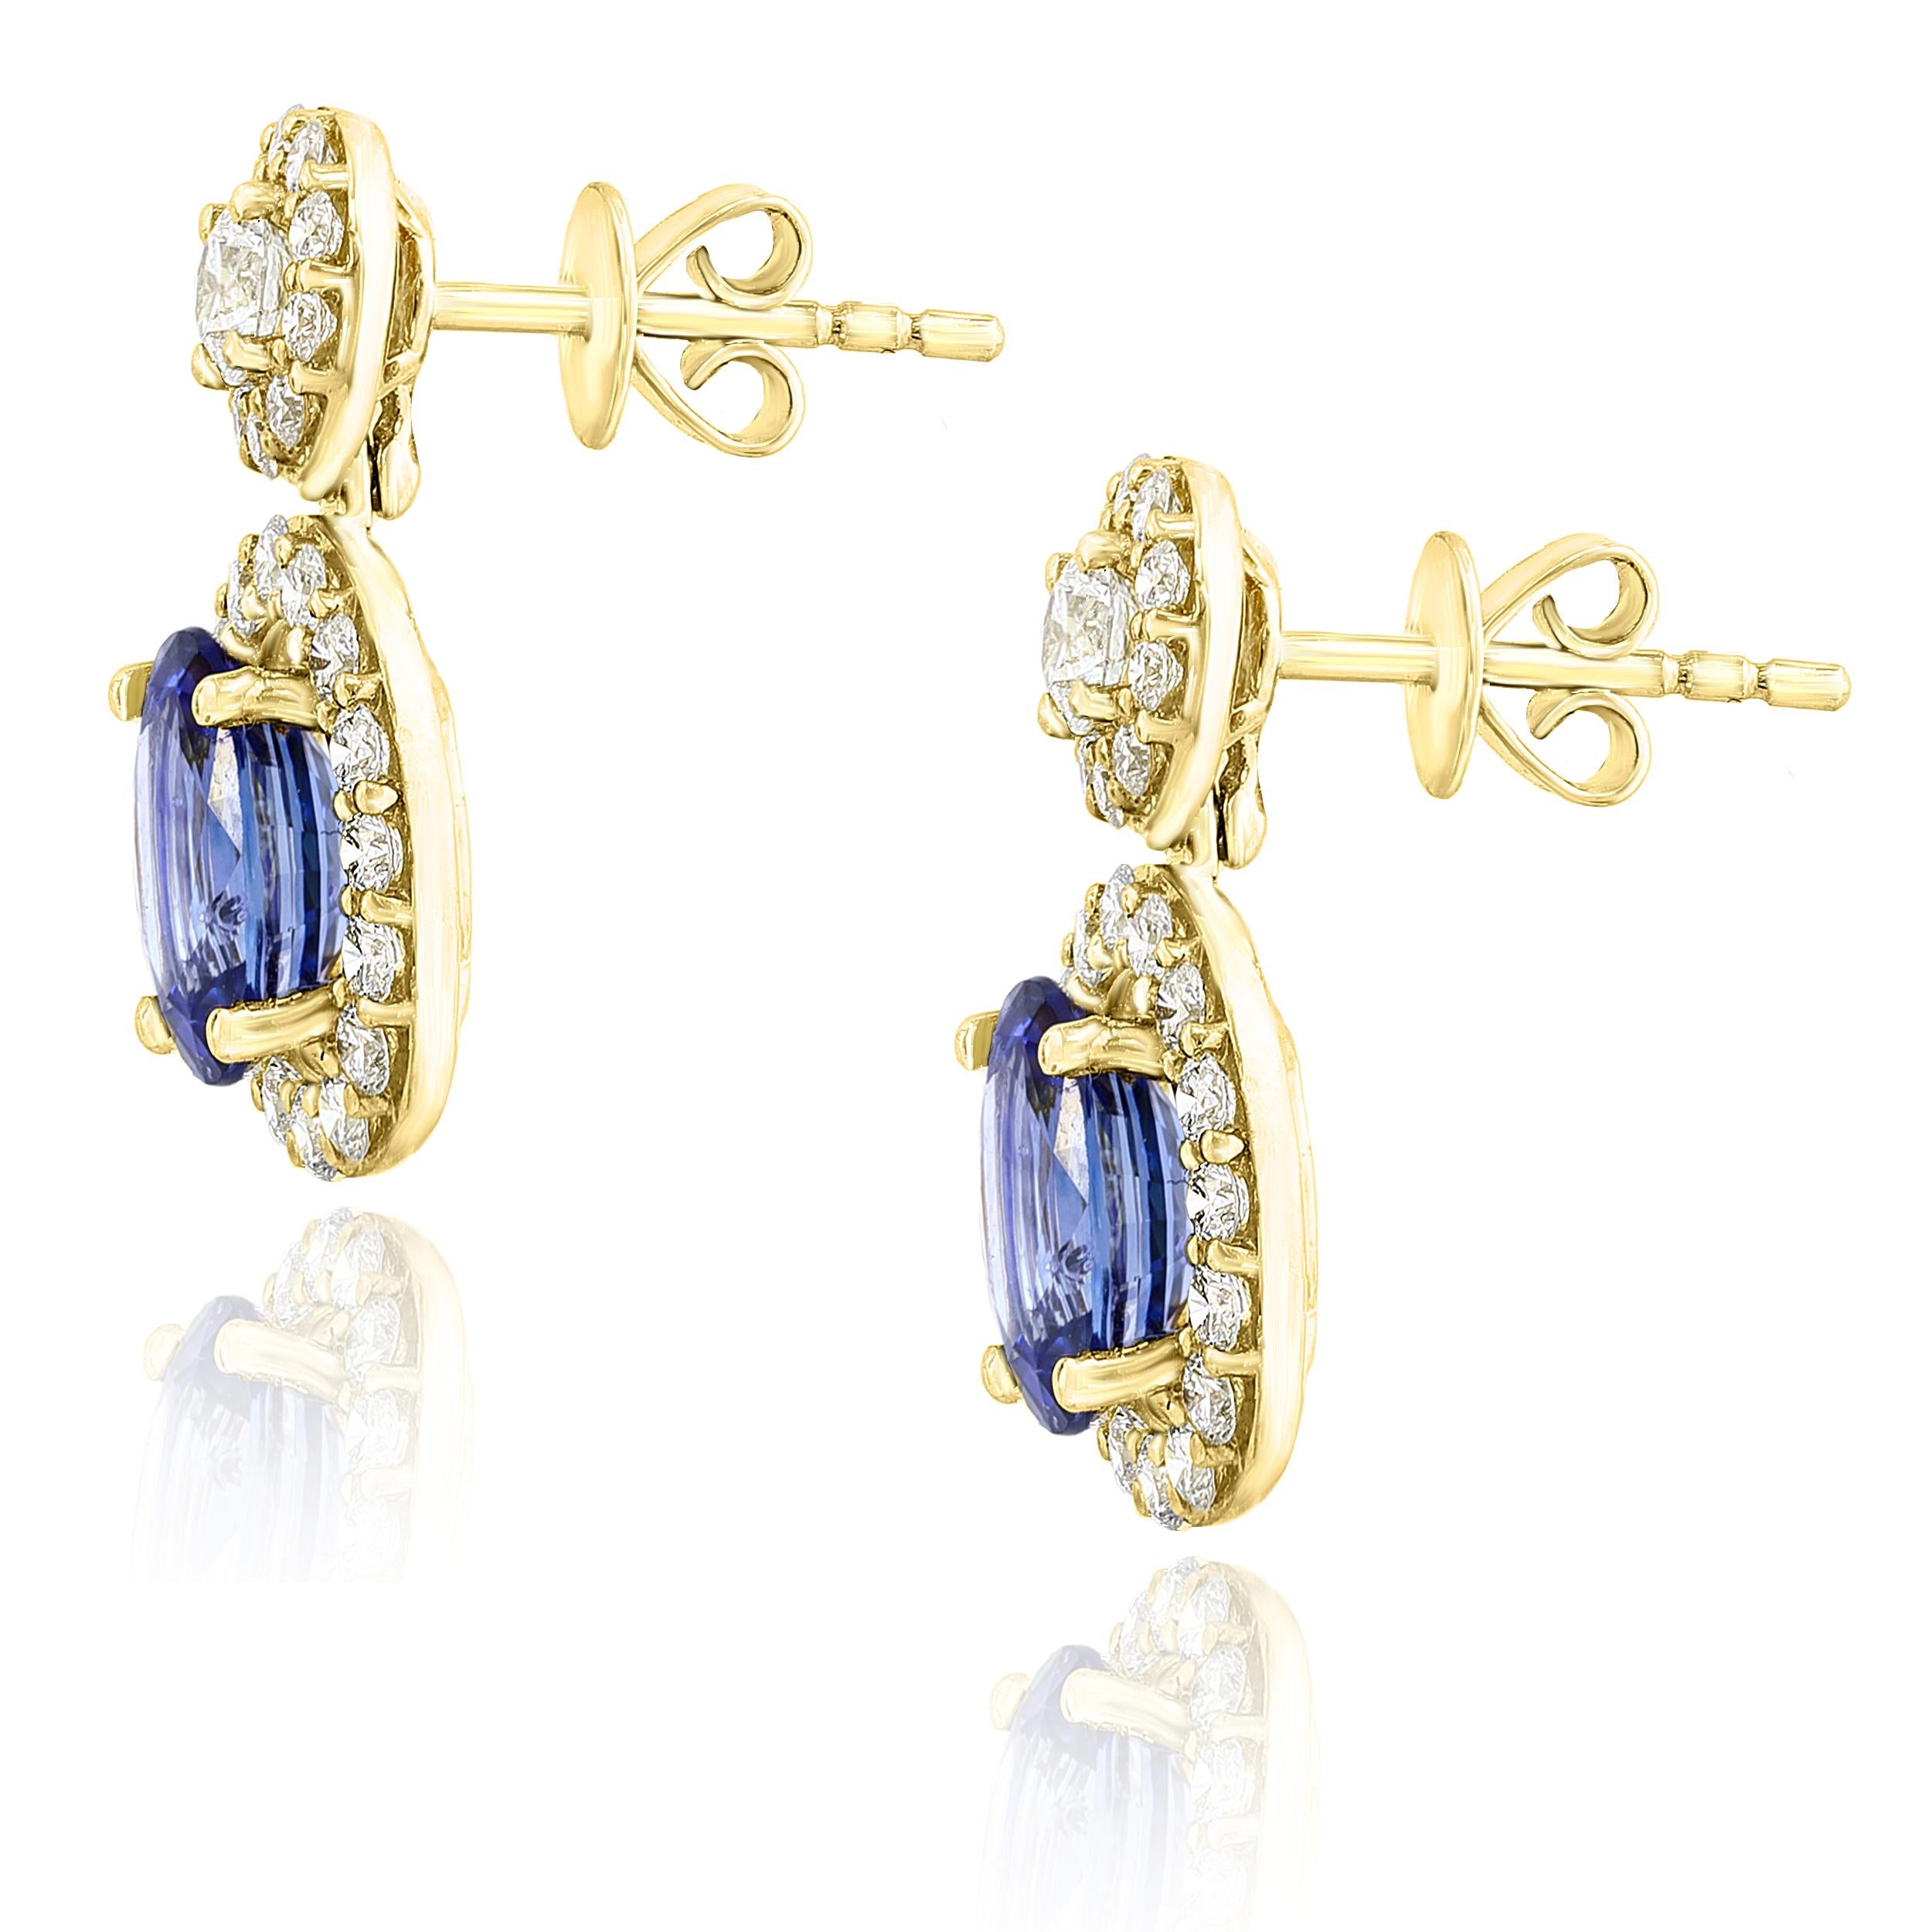 Contemporary 3.04 Carat of Oval Shape Blue Sapphire Diamond Drop Earrings in 18K Yellow Gold For Sale